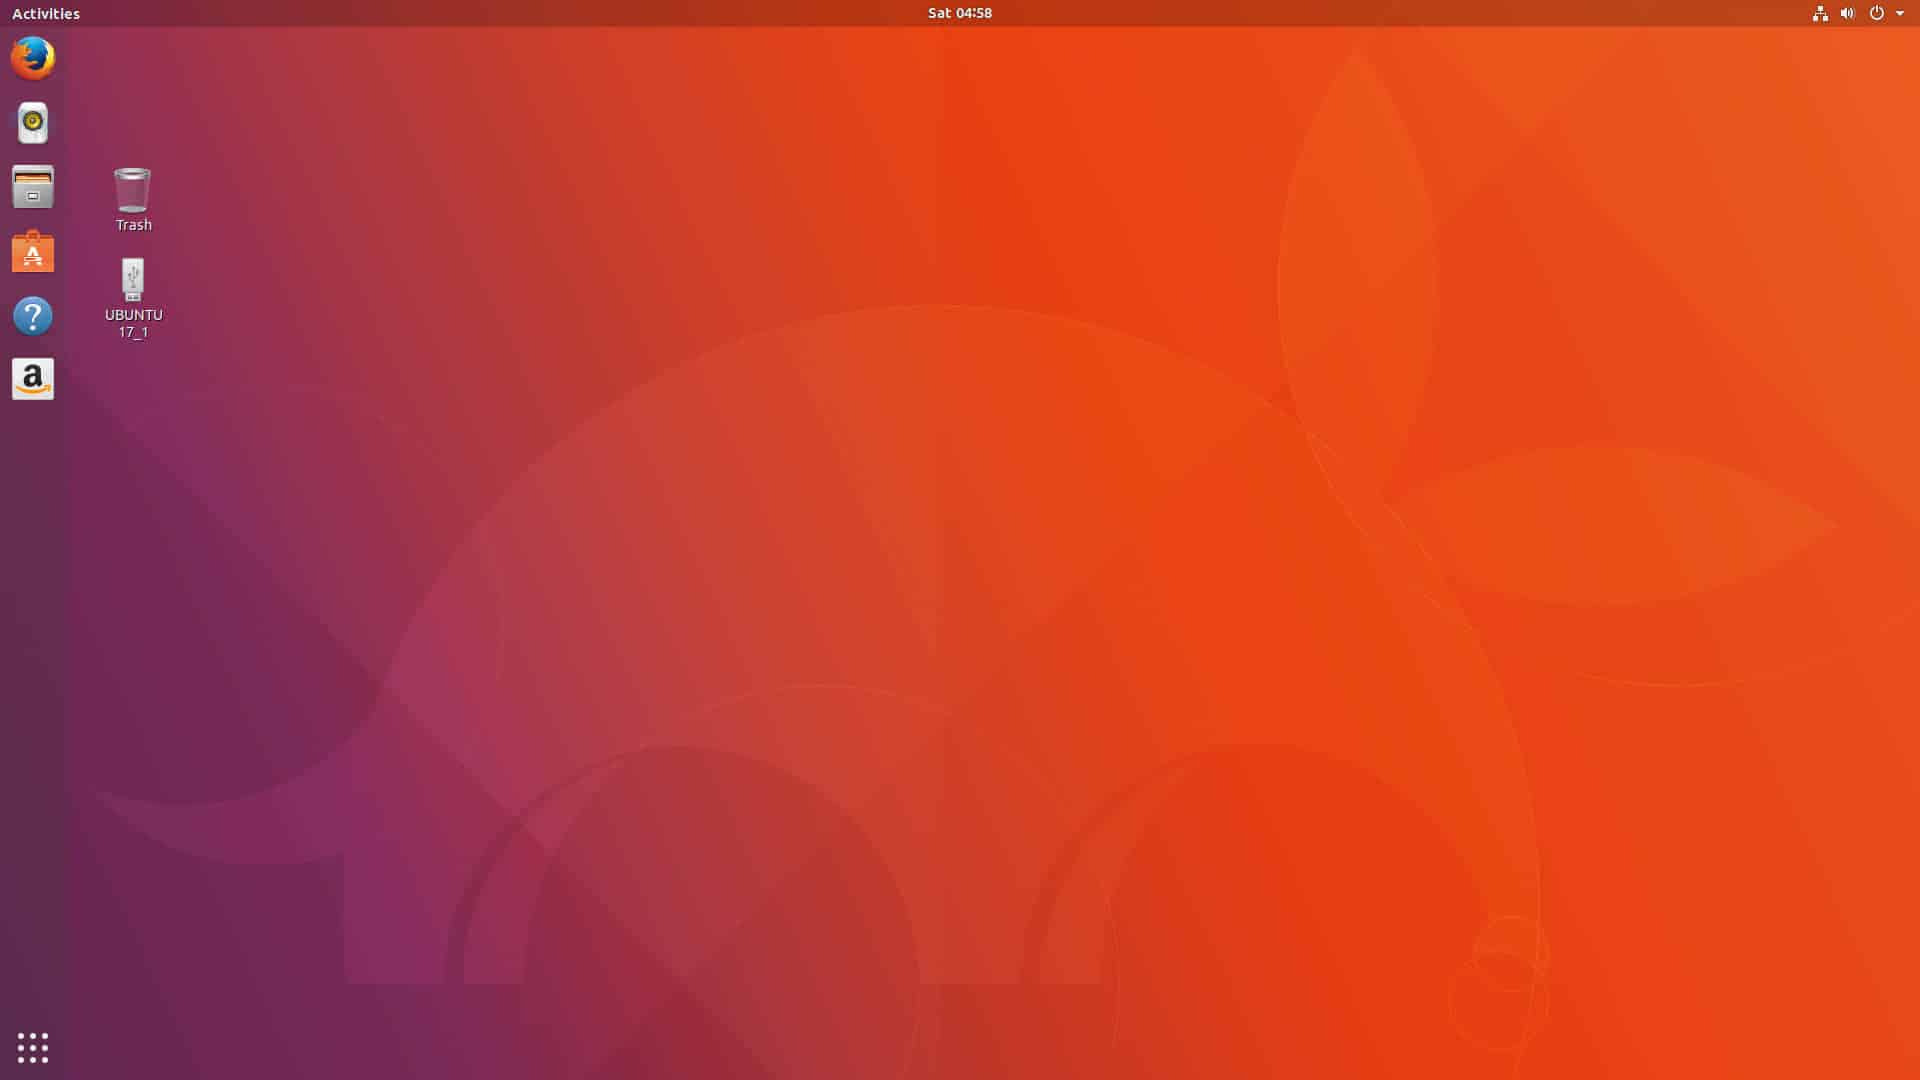 Ubuntu wants to collect more diagnostic data